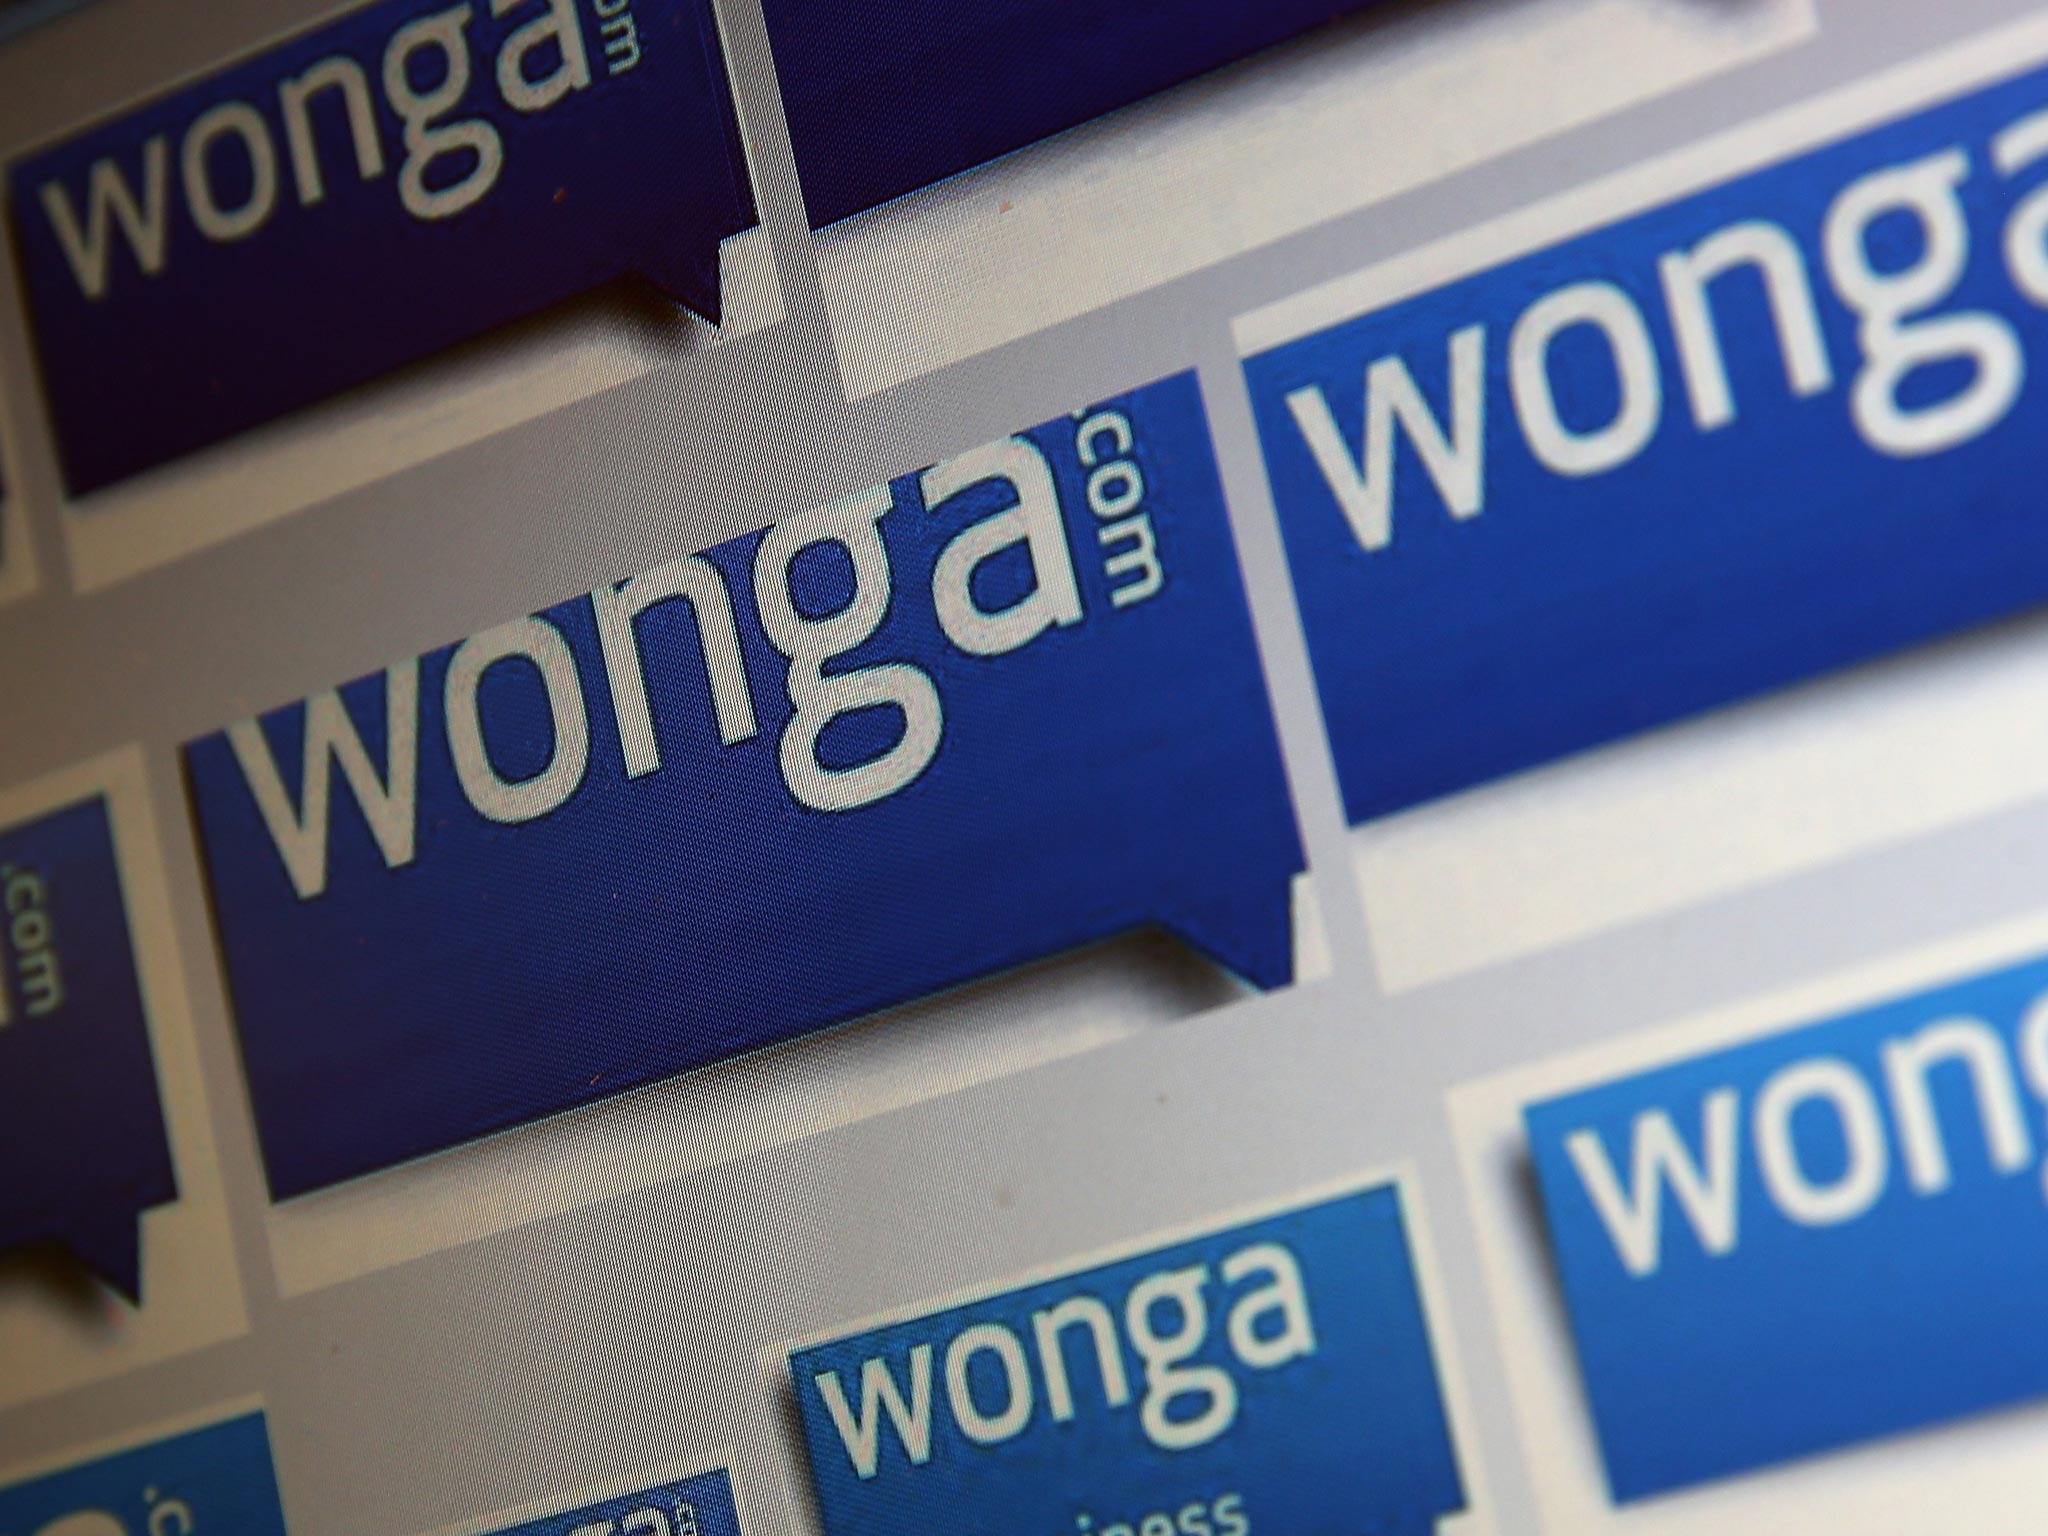 Wonga has often been criticised for charging its customers interest rates of up to thousands of per cent